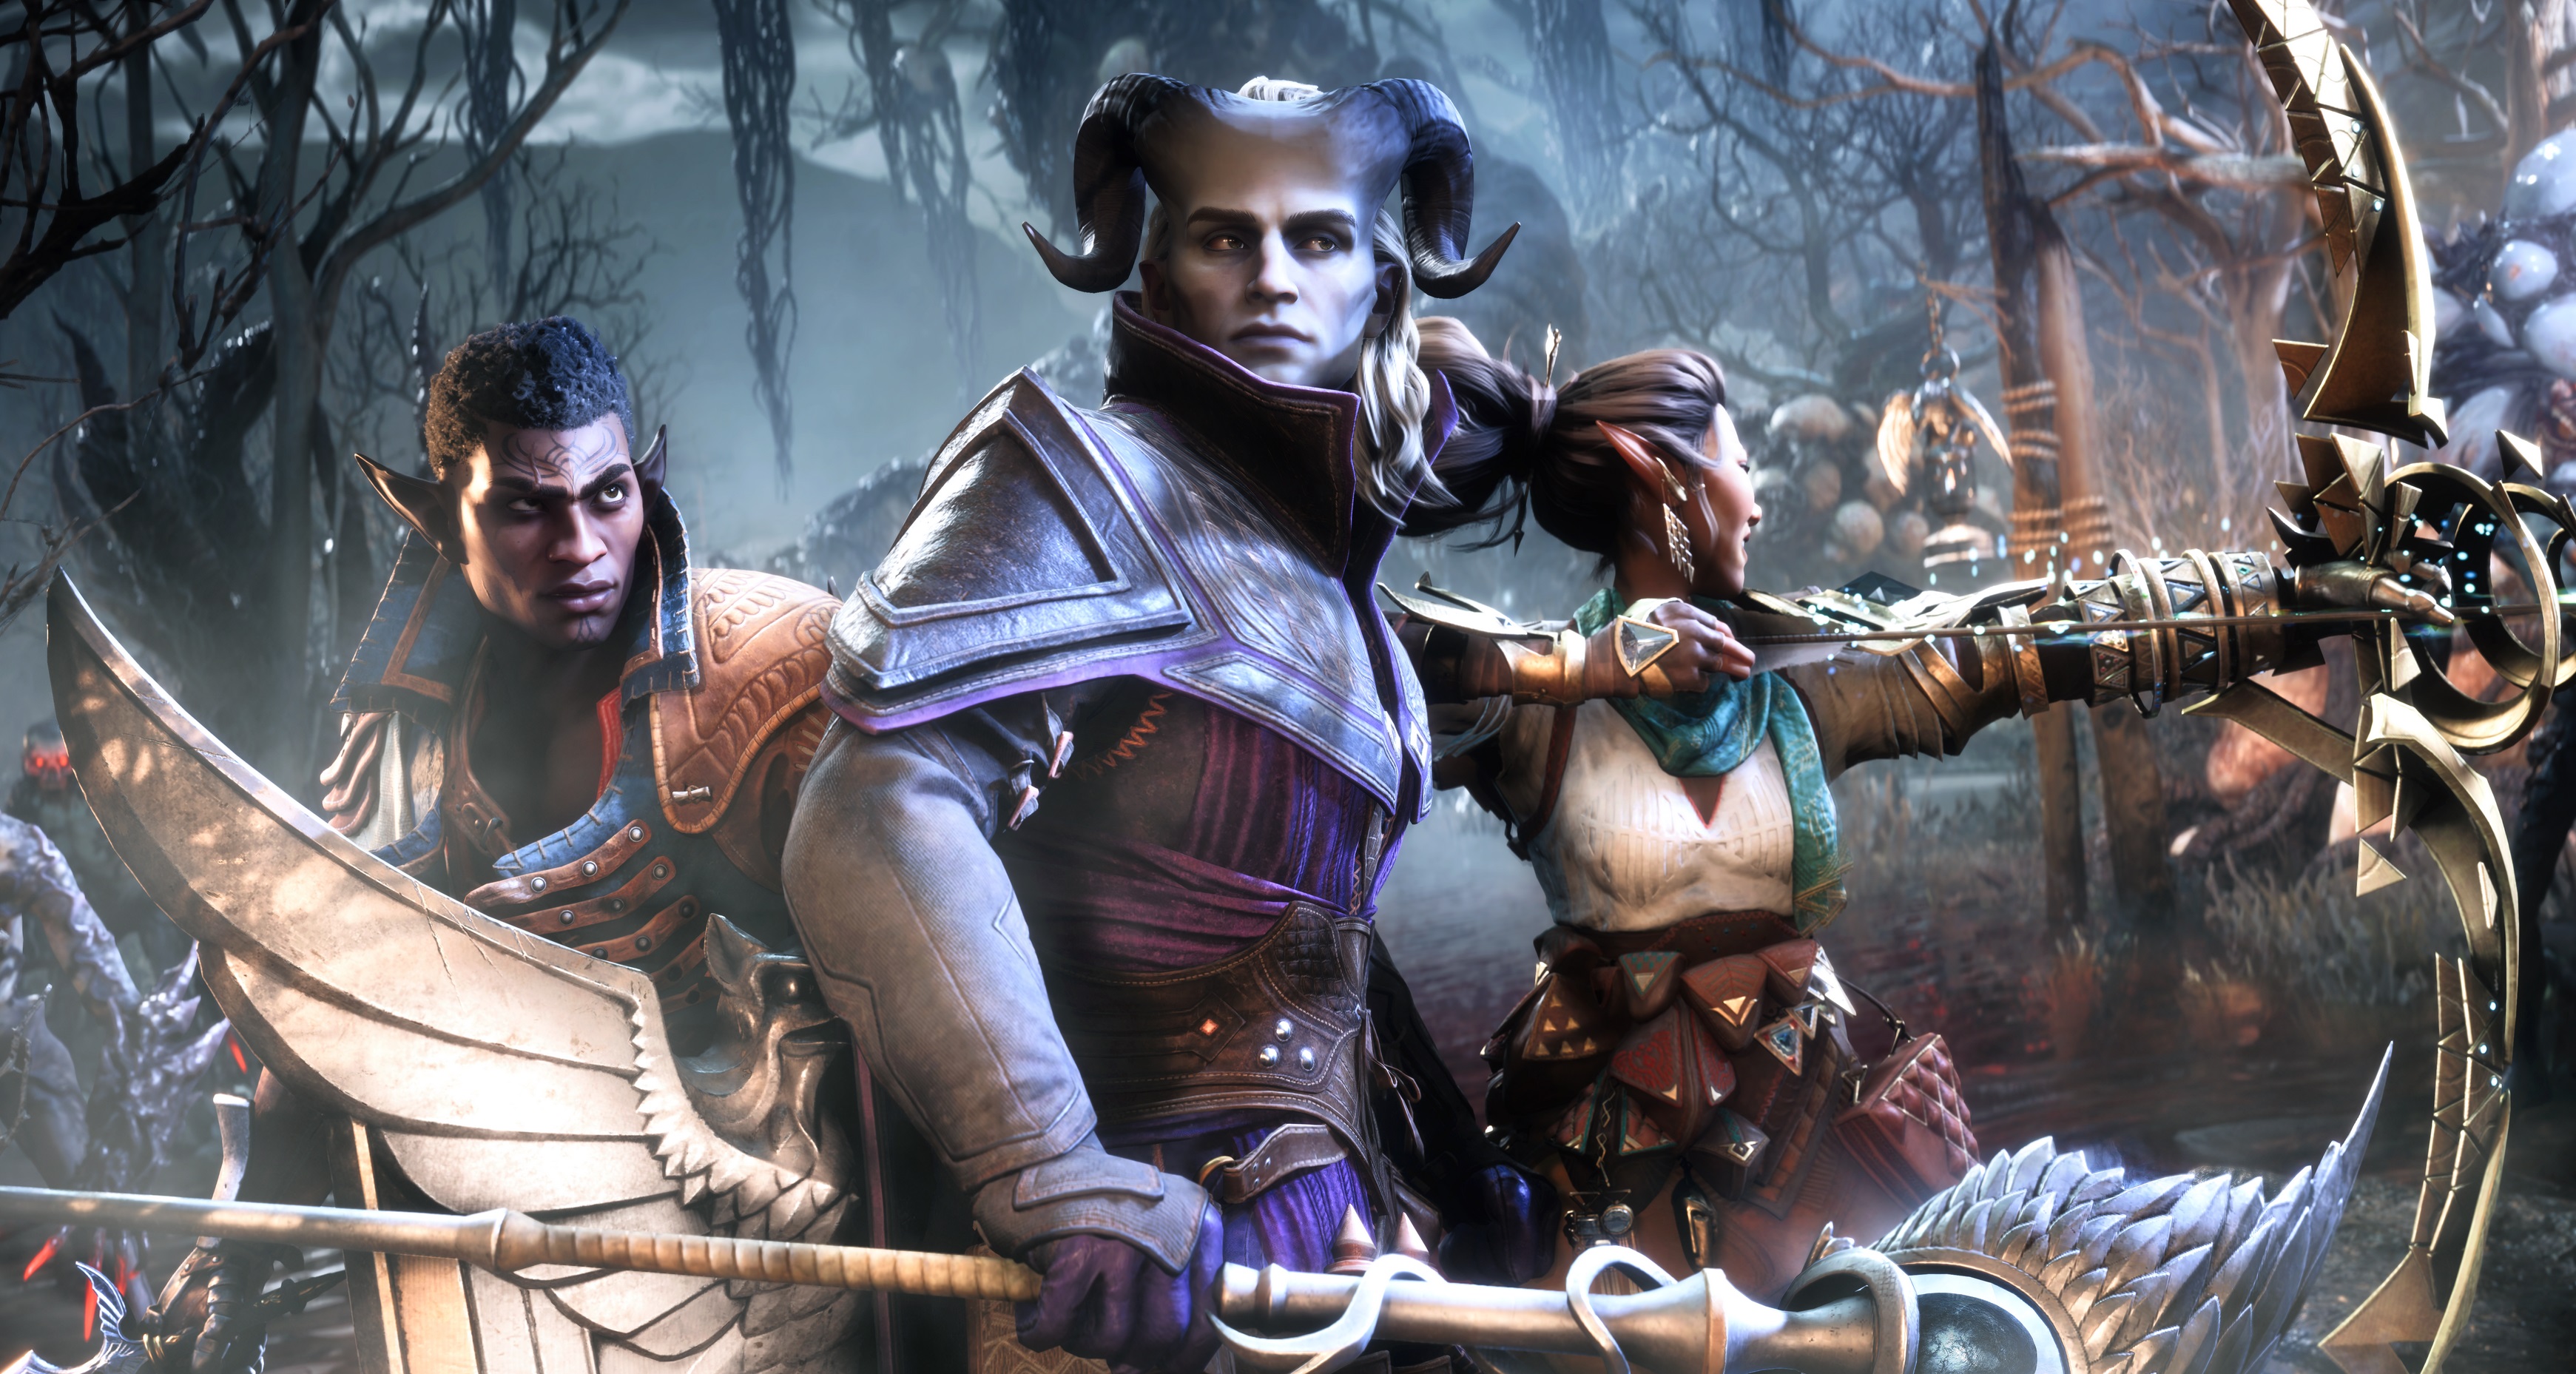 Dragon Age: The Veilguard’s difficulty options will let you turn off death entirely